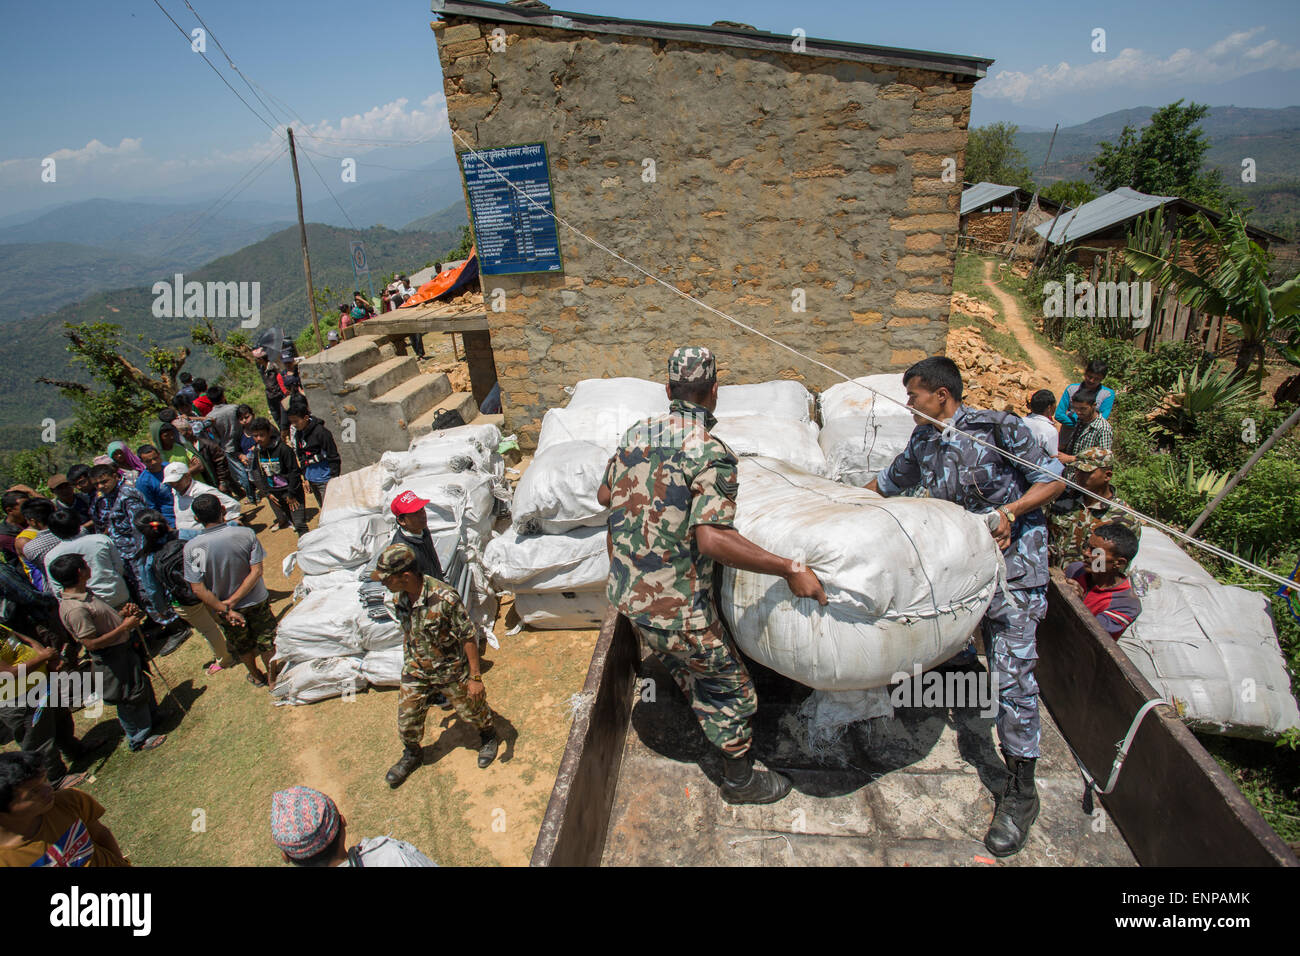 Nepalese military help unload humanitarian supplies in Gorkha District, Nepal following the 2015 earthquake. Stock Photo